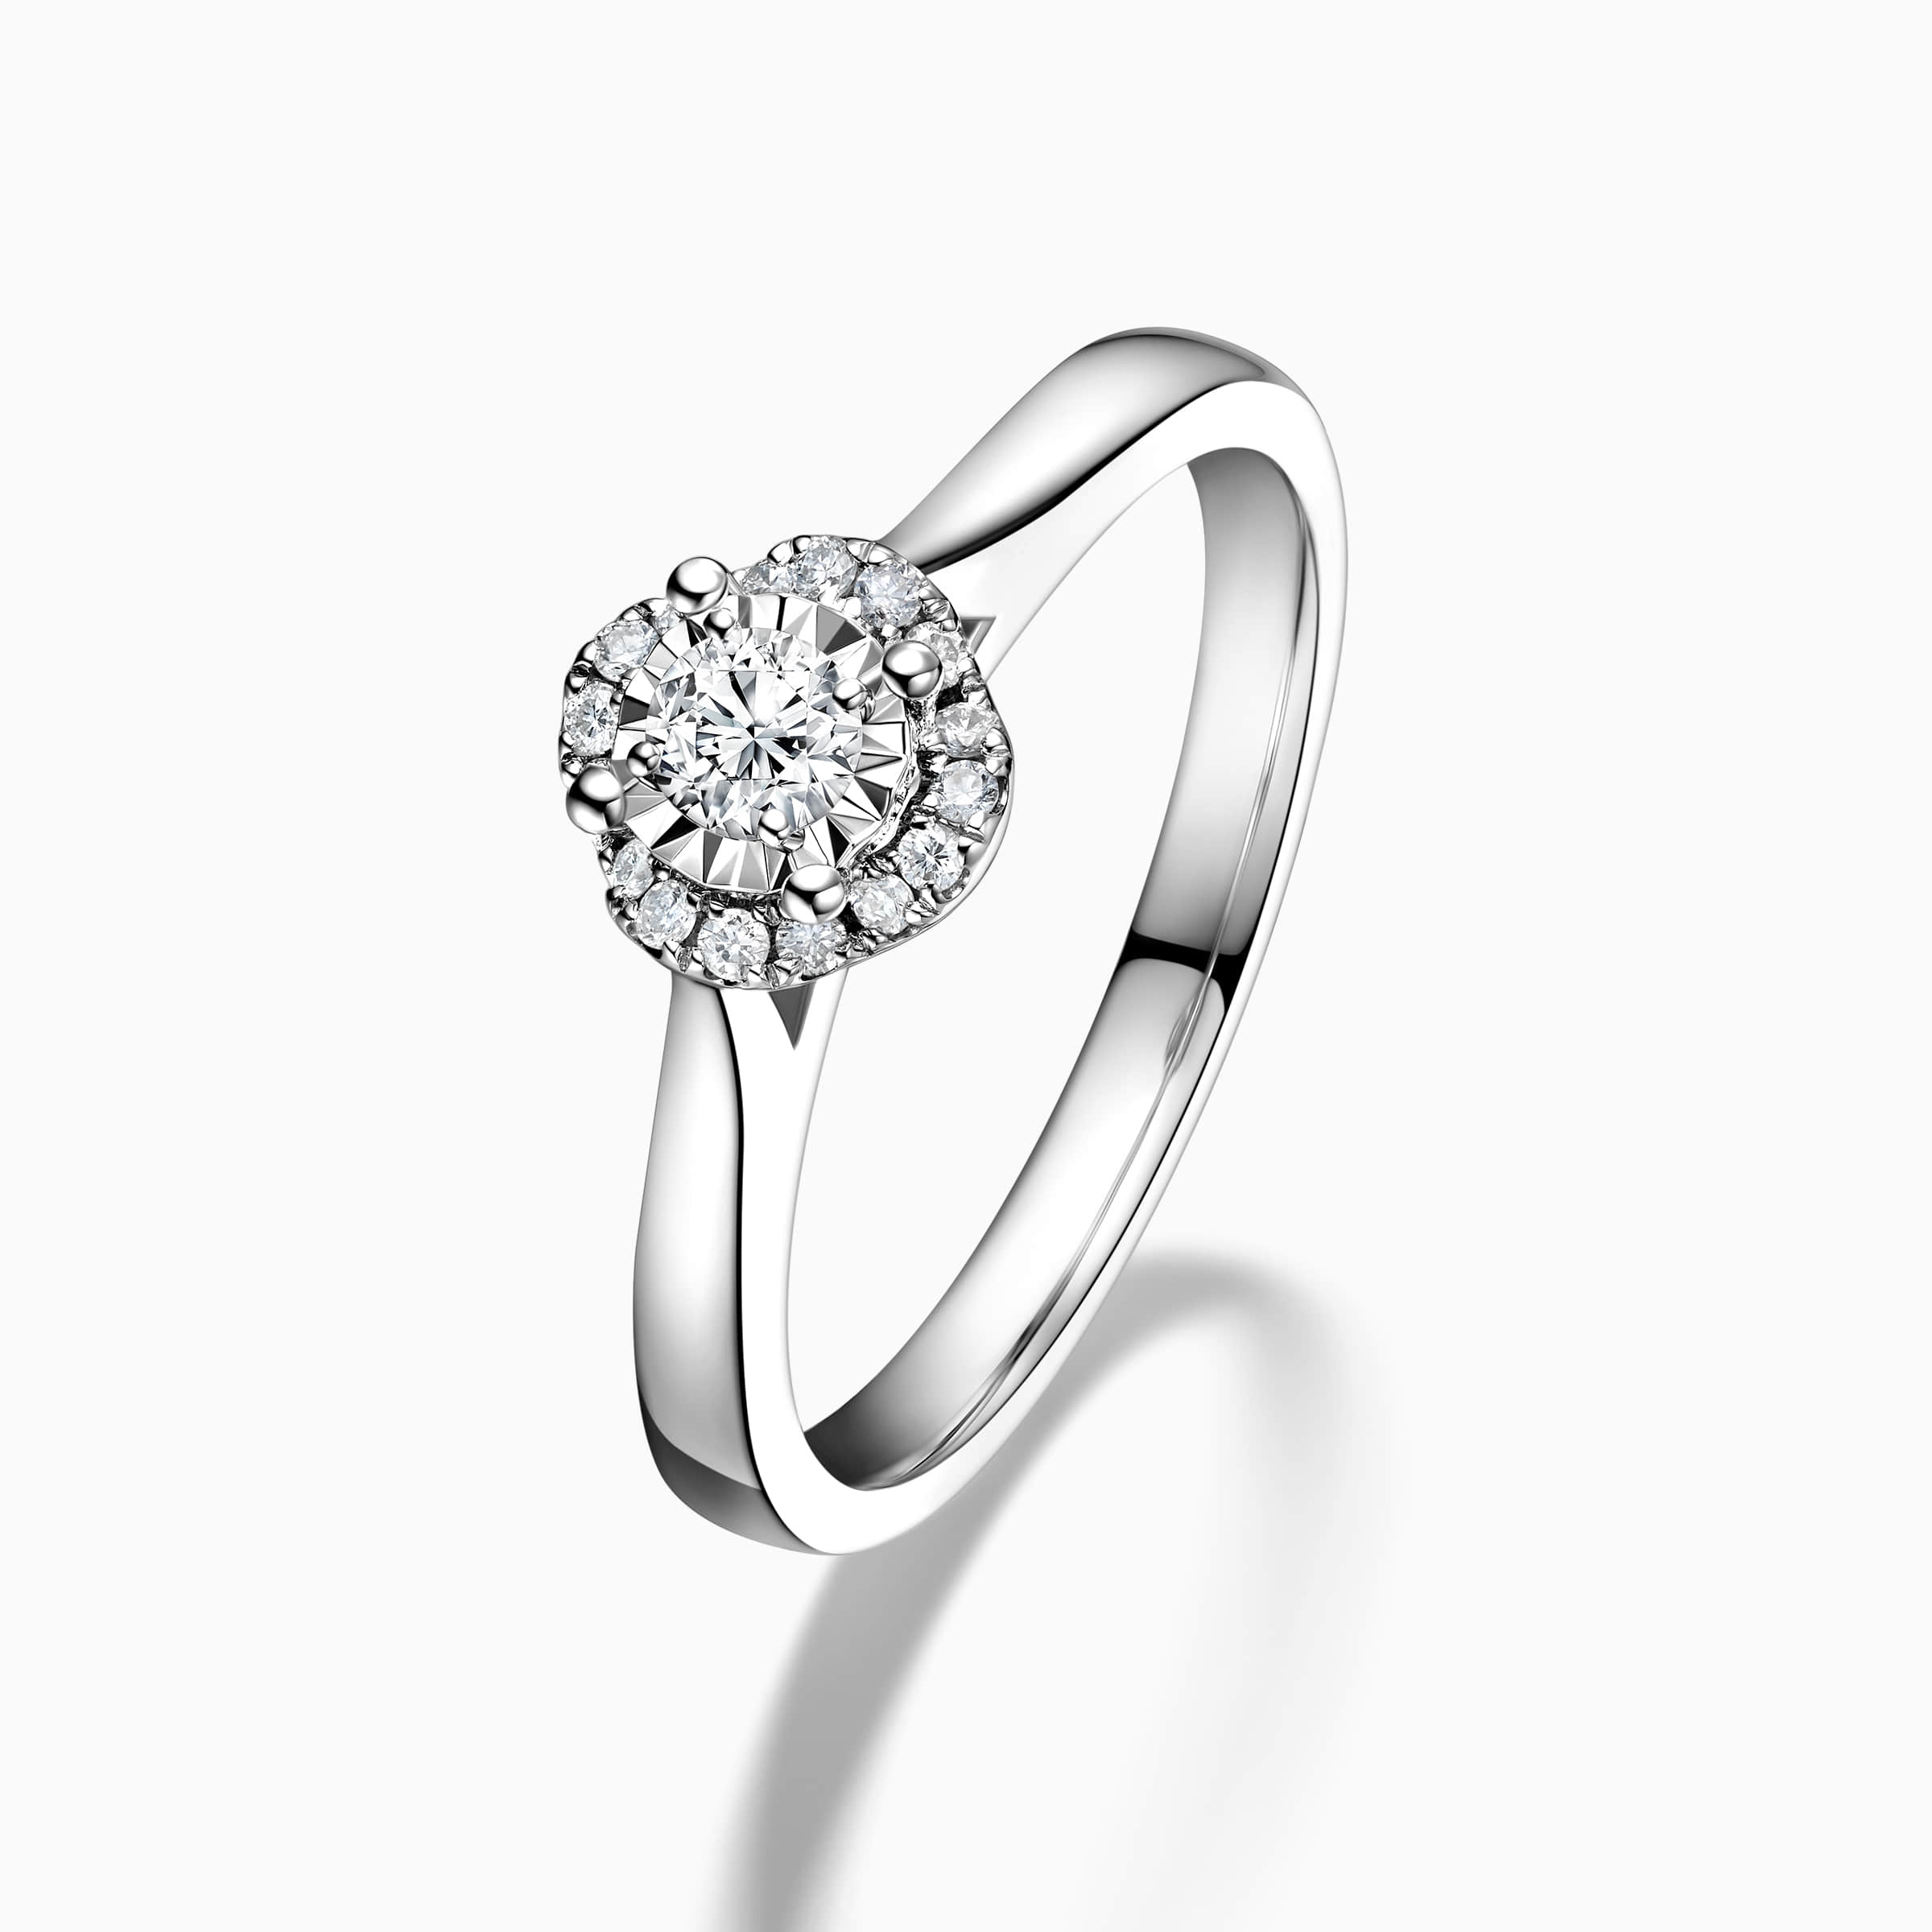 Darry Ring halo diamond promise ring side view